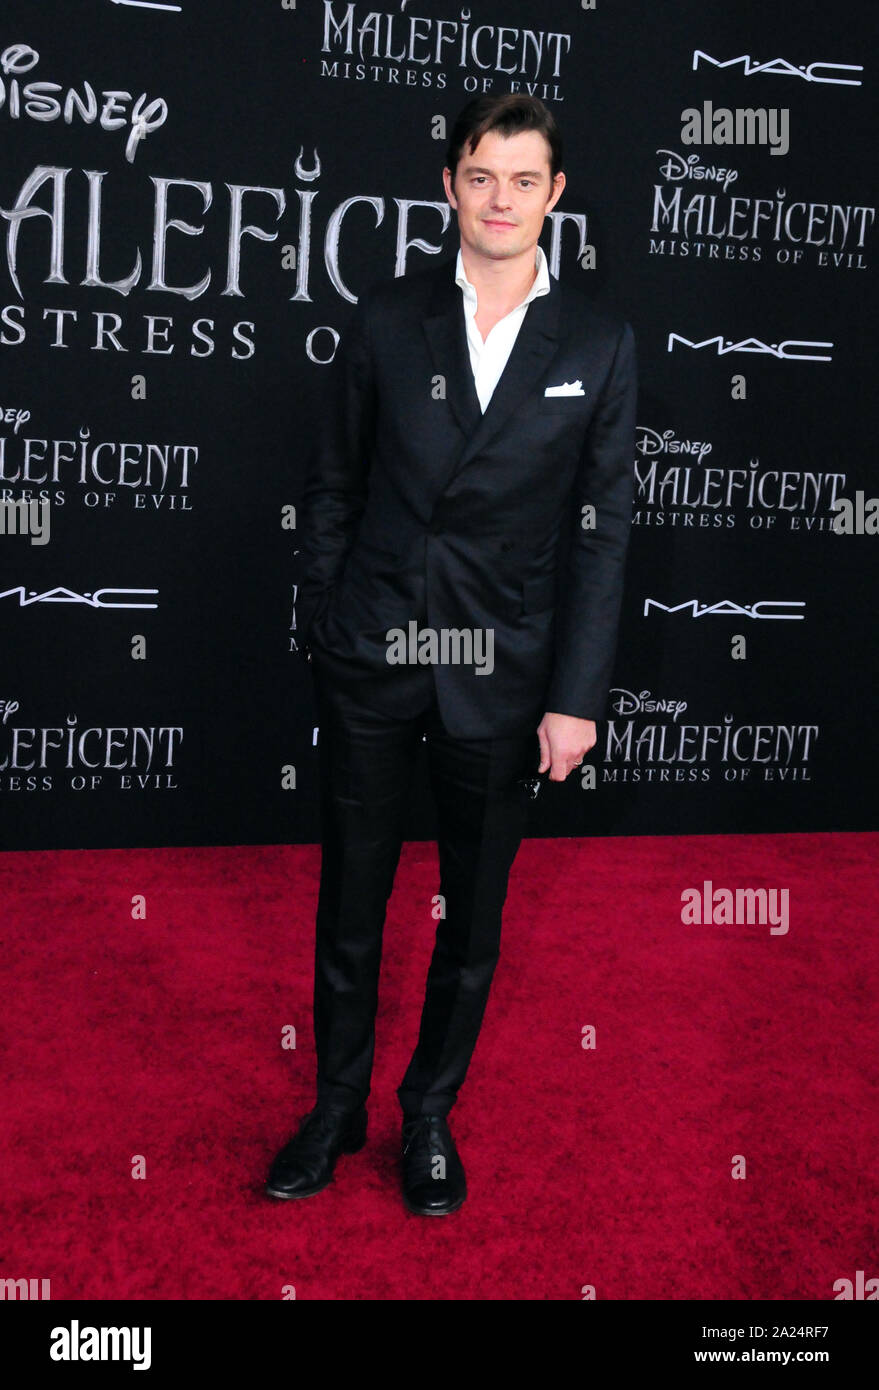 Hollywood, California, USA 30th September 2019 Actor Sam Riley attends the World Premiere of Disney's 'Maleficent: Mistress of Evil' on September 30, 2019 at the El Capitan Theatre in Hollywood, California, USA. Photo by Barry King/Alamy Live News Stock Photo